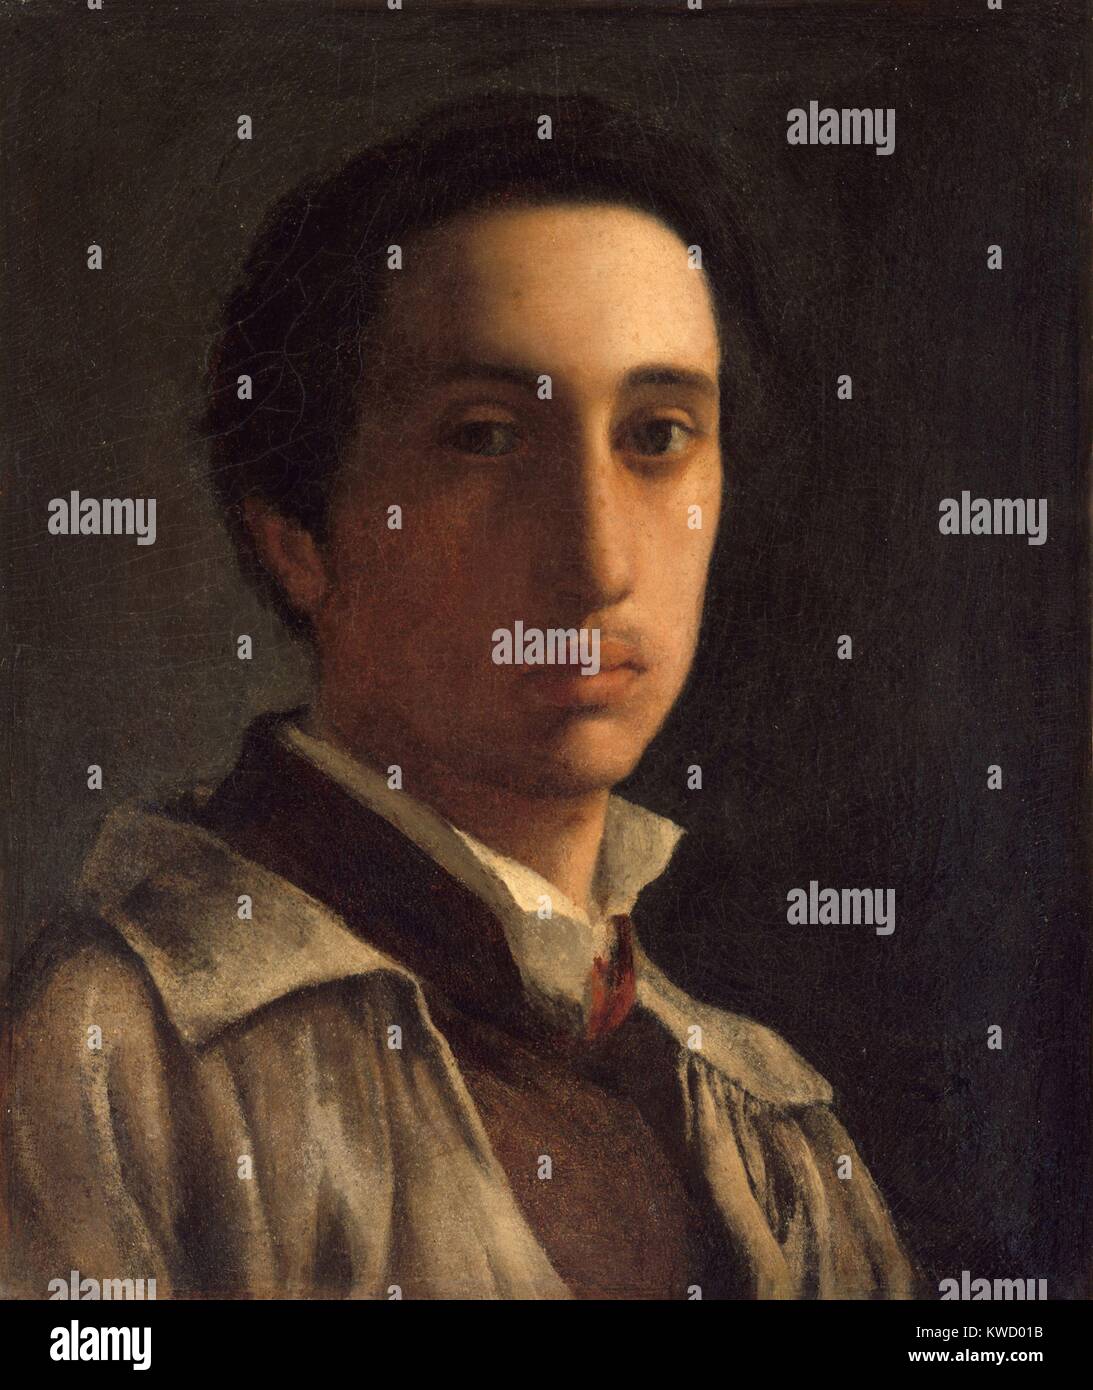 Self-Portrait, by Edgar Degas, 1855-56, French impressionist painting, oil on paper. This early self-portrait was made when Degas was strongly influenced by the Neo-Classical painter Jean-Auguste-Dominique Ingres (BSLOC 2017 3 94) Stock Photo